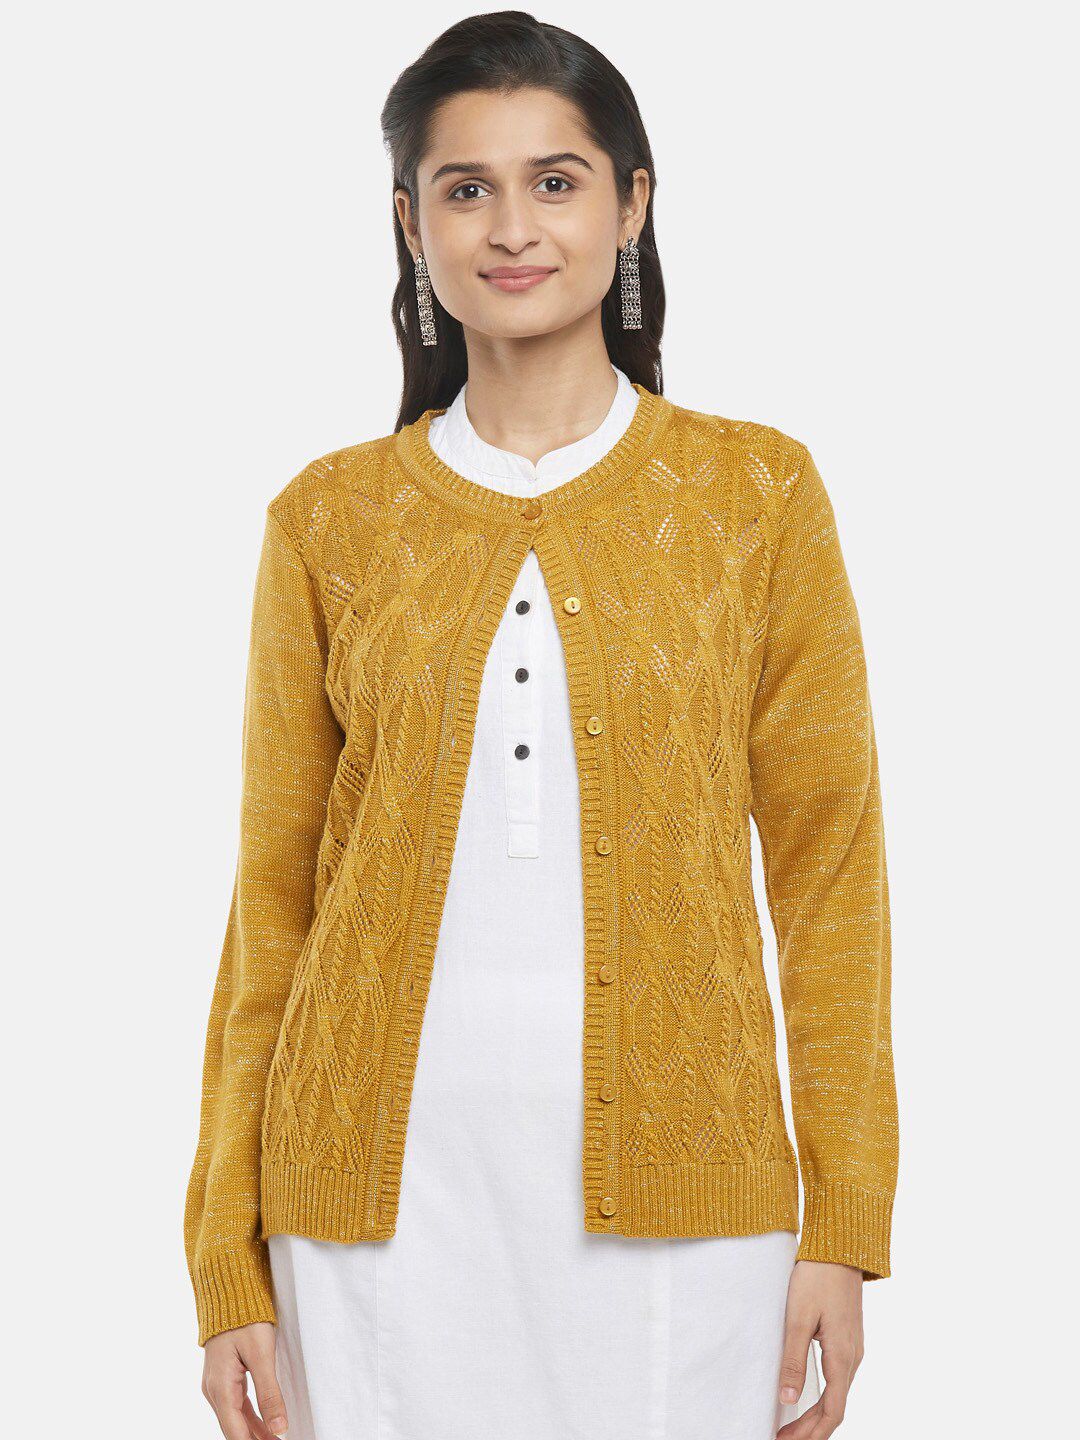 RANGMANCH BY PANTALOONS Women Mustard Cable Knit Pure Acrylic Cardigan Price in India